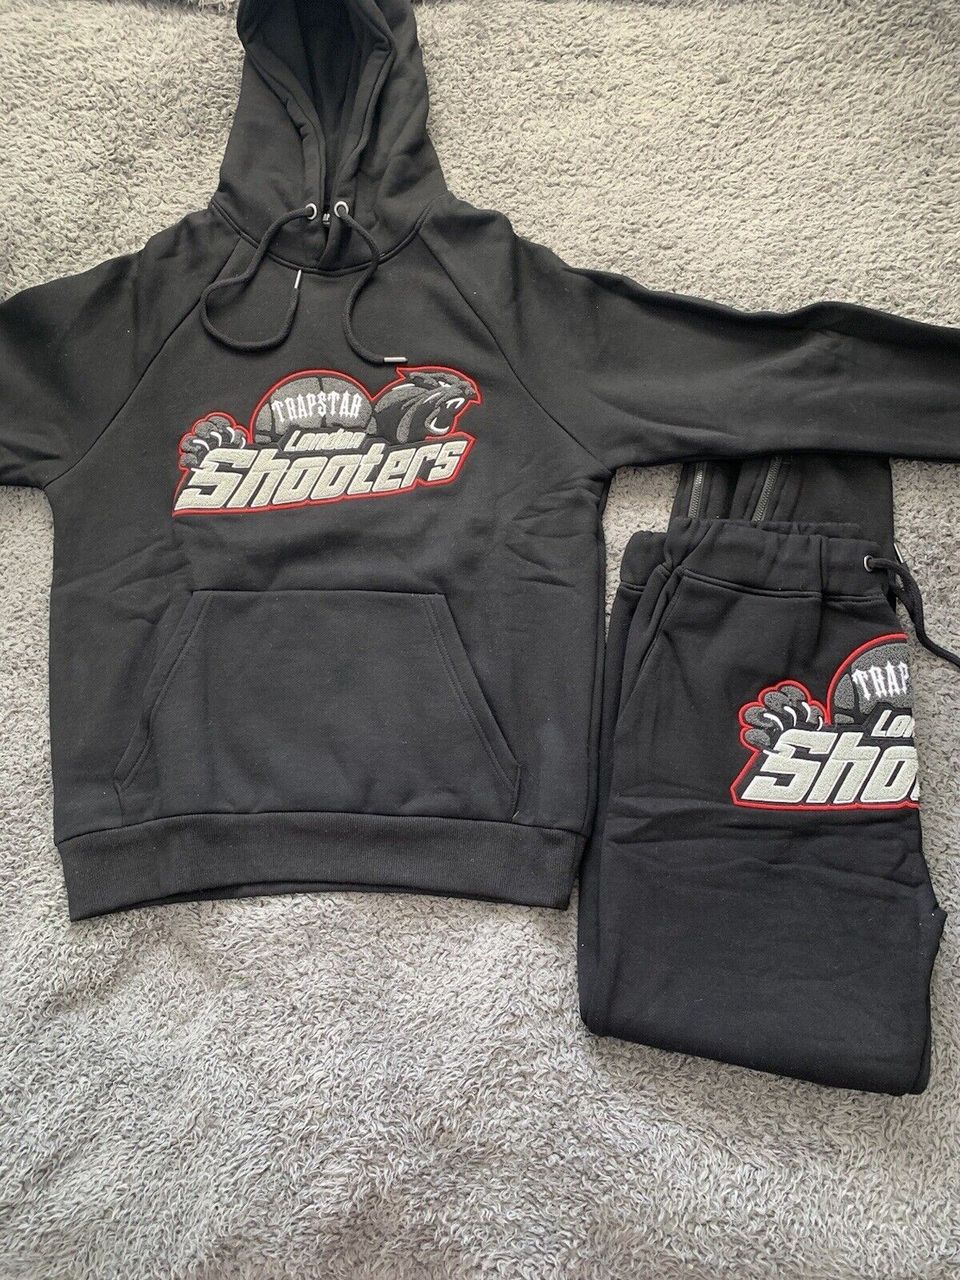 Trapstar Shooters tracksuit